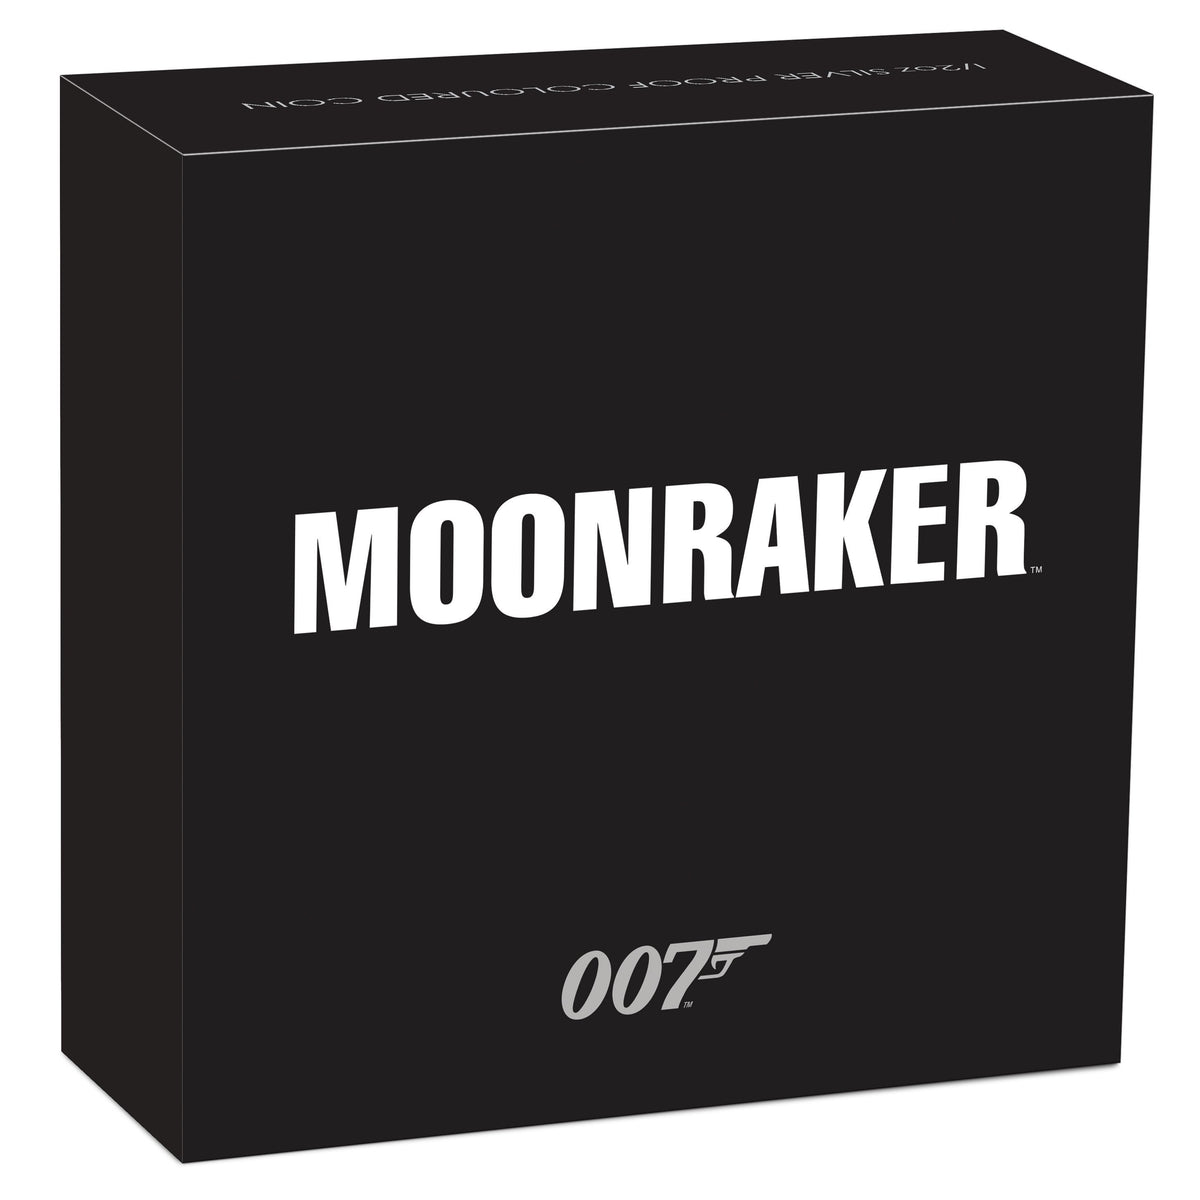 James Bond Moonraker 1/2 oz Silver Proof Coin - By The Perth Mint SCOIN PERTH MINT 